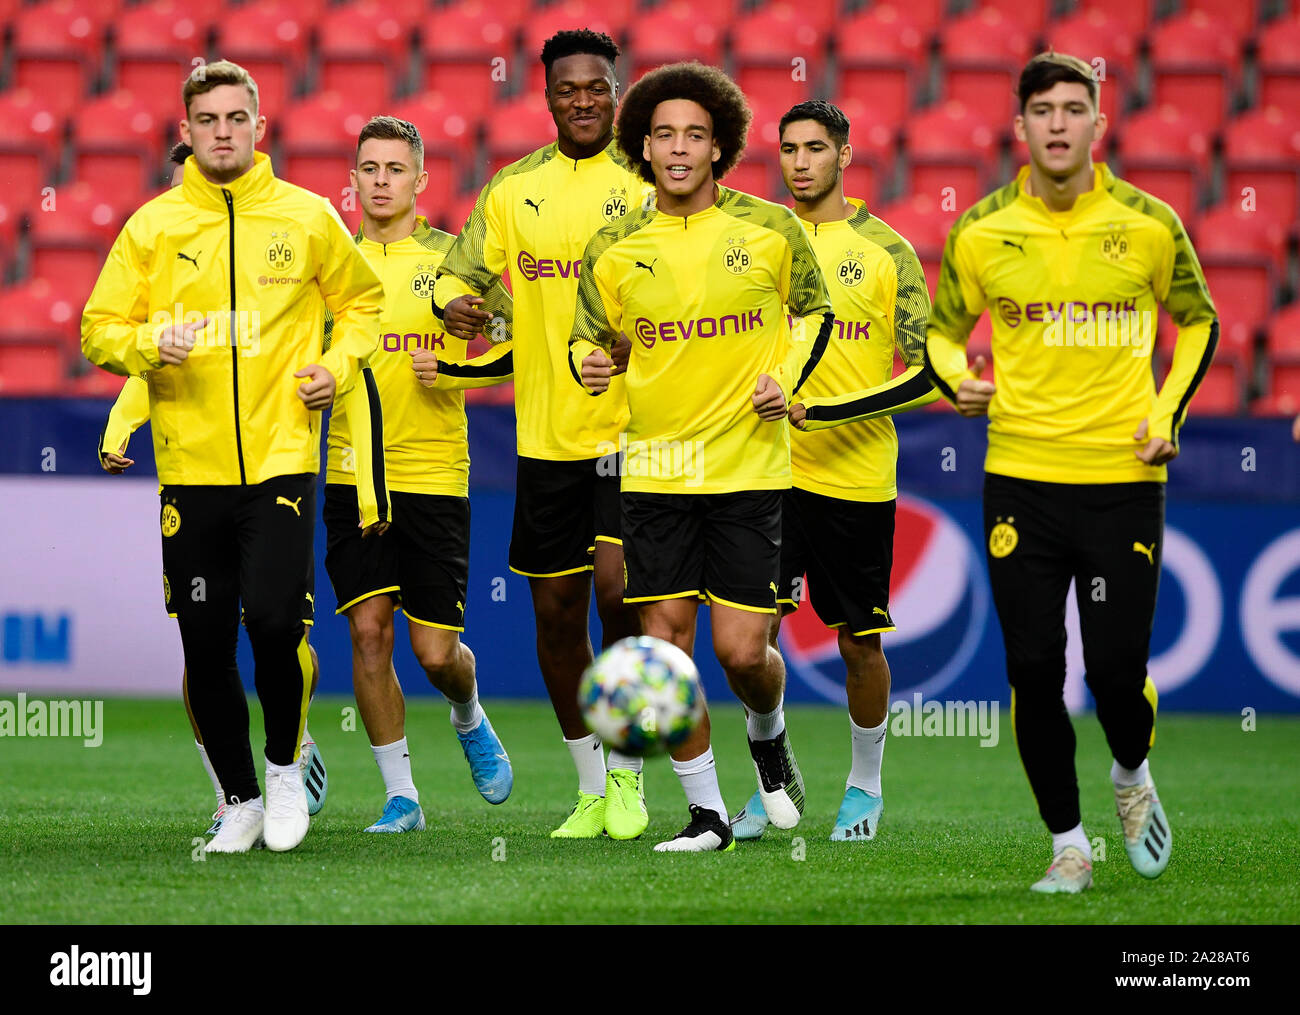 Borussia Dortmund's players train during a training session of the team, one day prior to the UEFA Champions League match SK Slavia Prague vs Borussia Dortmund, second round of basic group F, on October 1, 2019, in Prague, Czech Republic. (CTK Photo/Roman Vondrous) Stock Photo